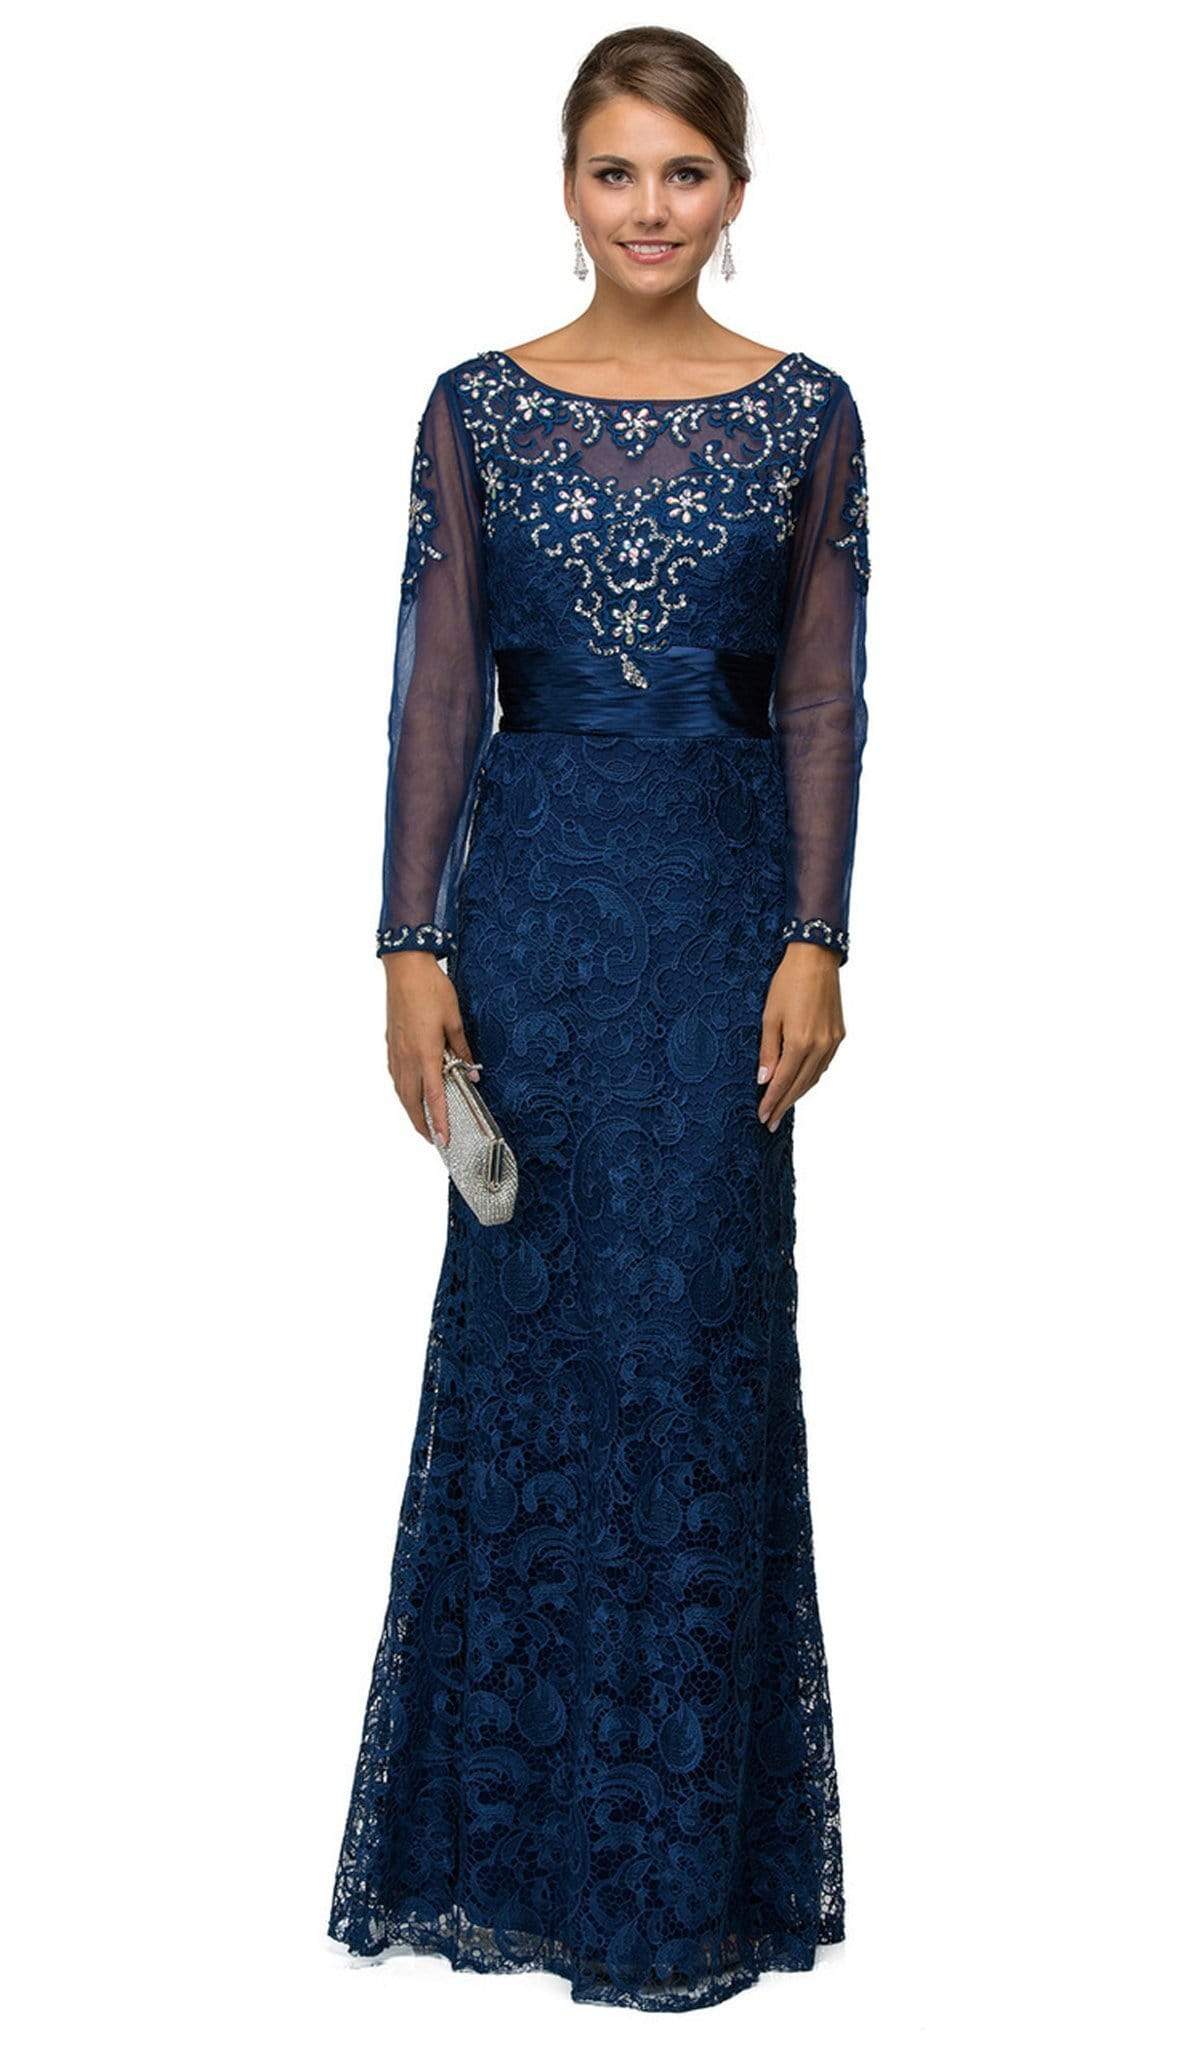 Dancing Queen - 9070 Finely Jeweled Illusion A-Line Long Formal Dress Mother of the Bride Dresses XS / Navy